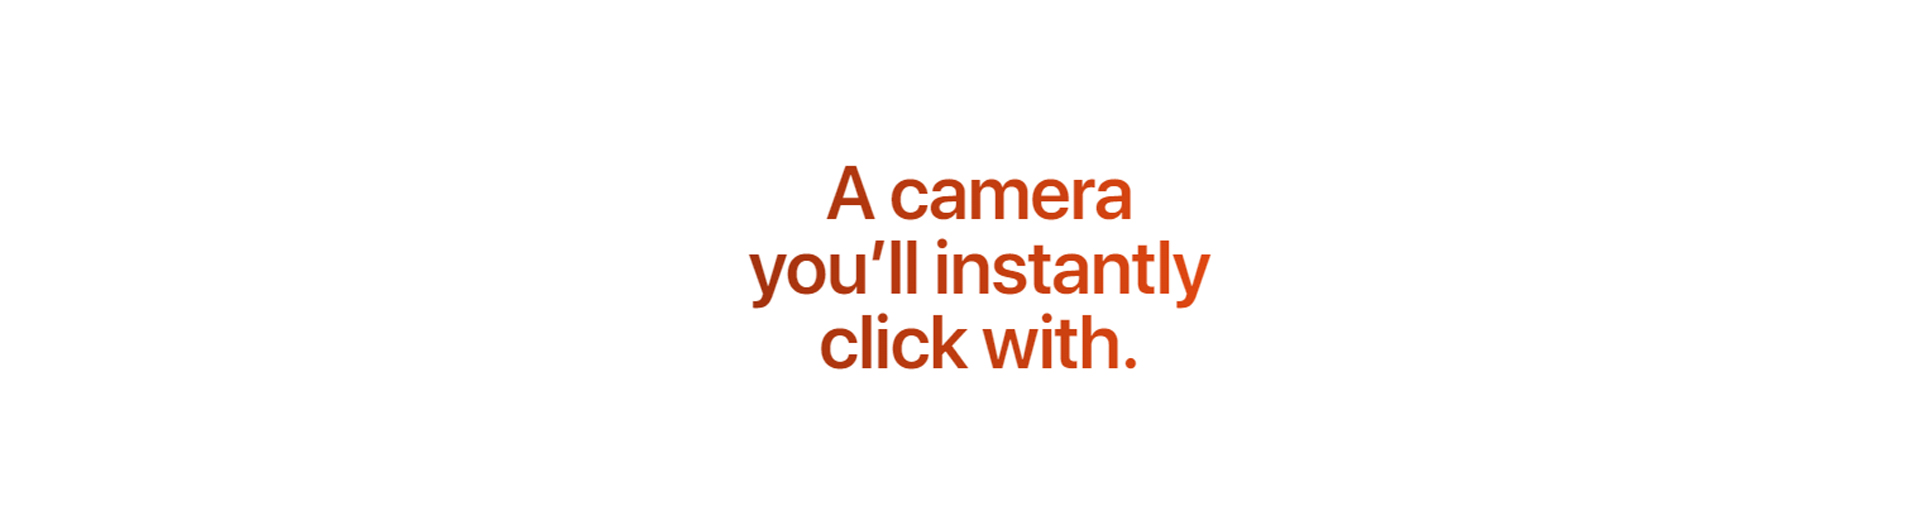 A Camera You Will Instantly Click with